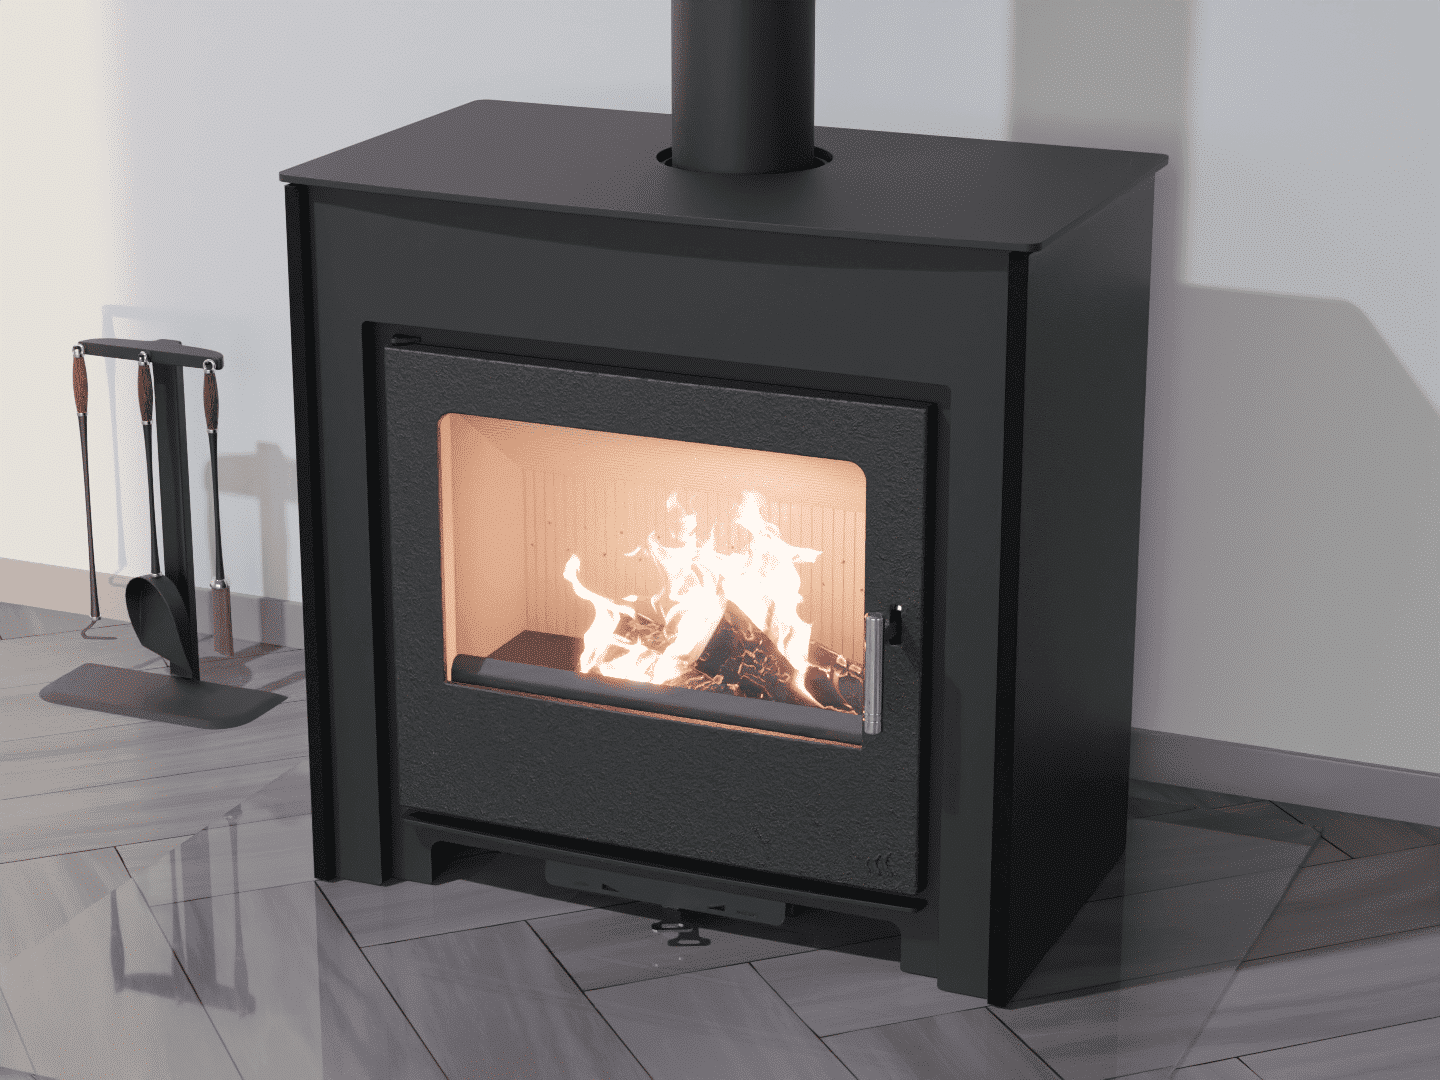 2101_Fireplace stove with heat exchanger_Graphite Black